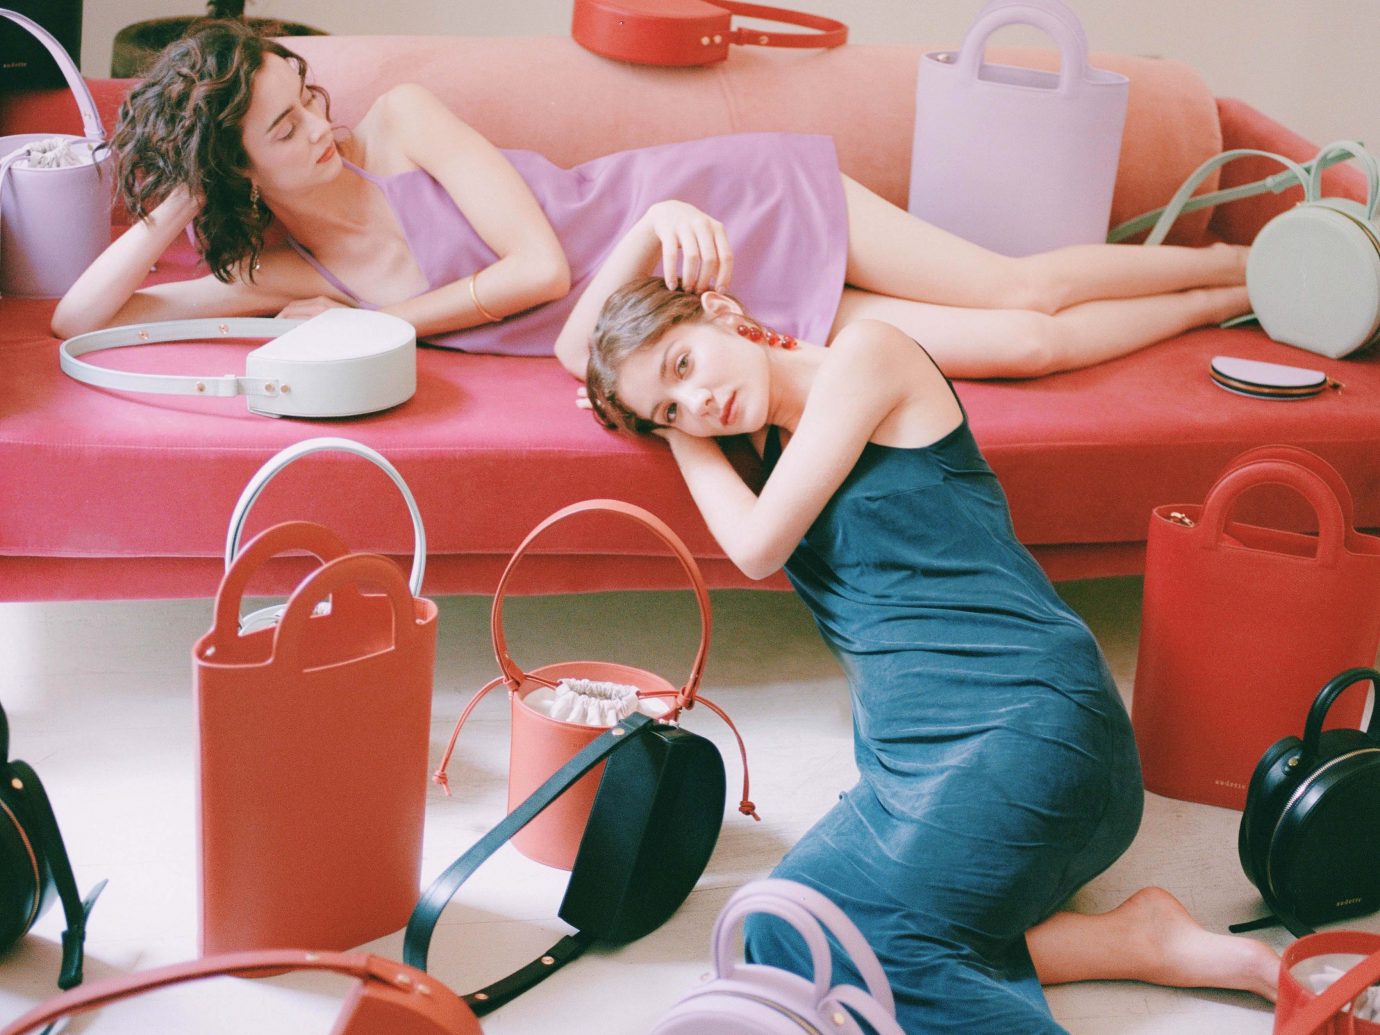 Two women modeling purses on a red couch